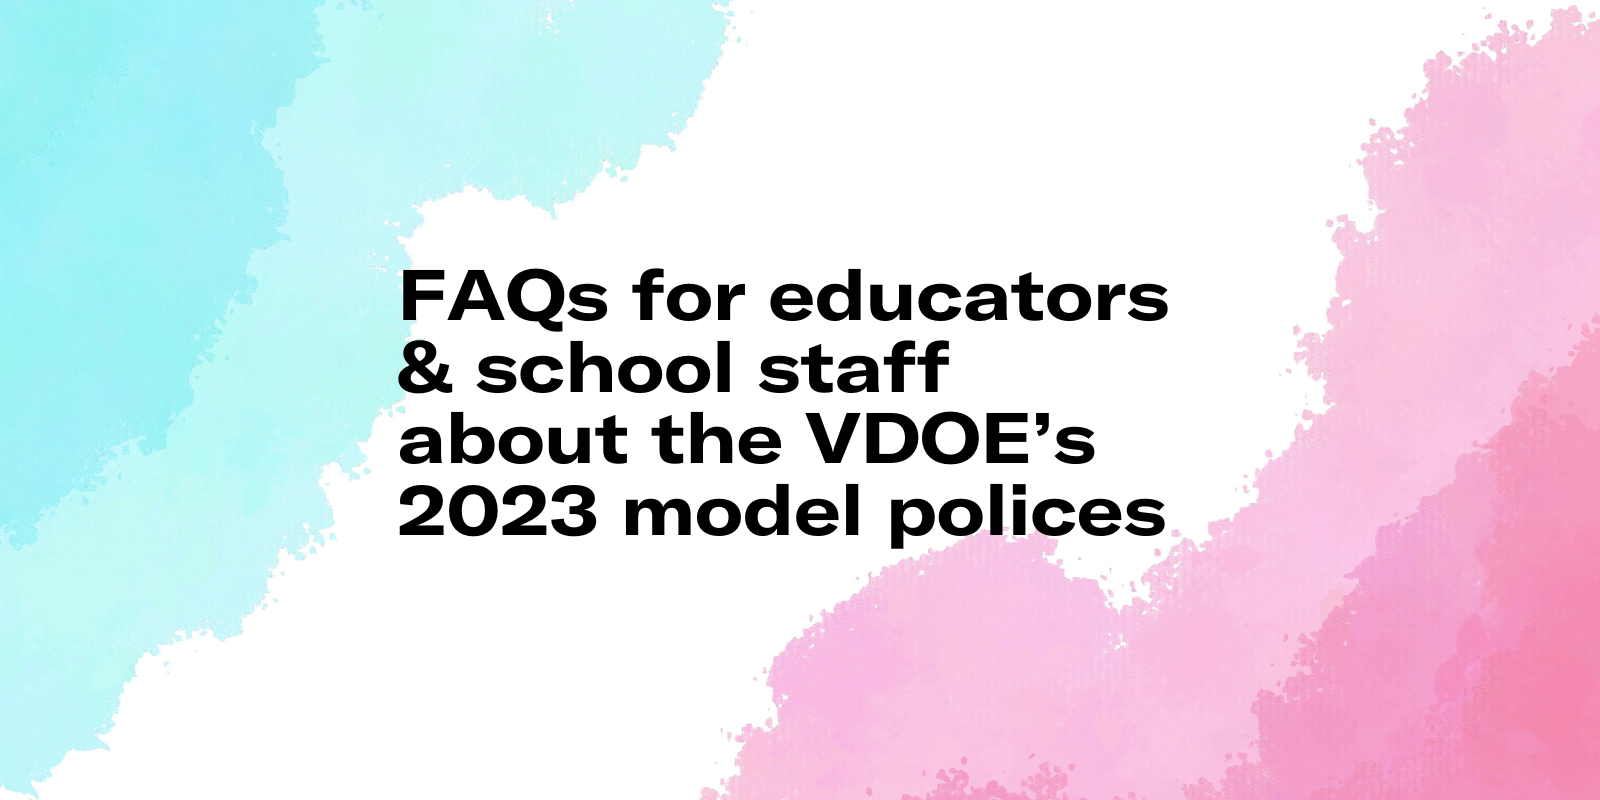 FAQs for educators & school staff about the VDOE's 2023 model policies